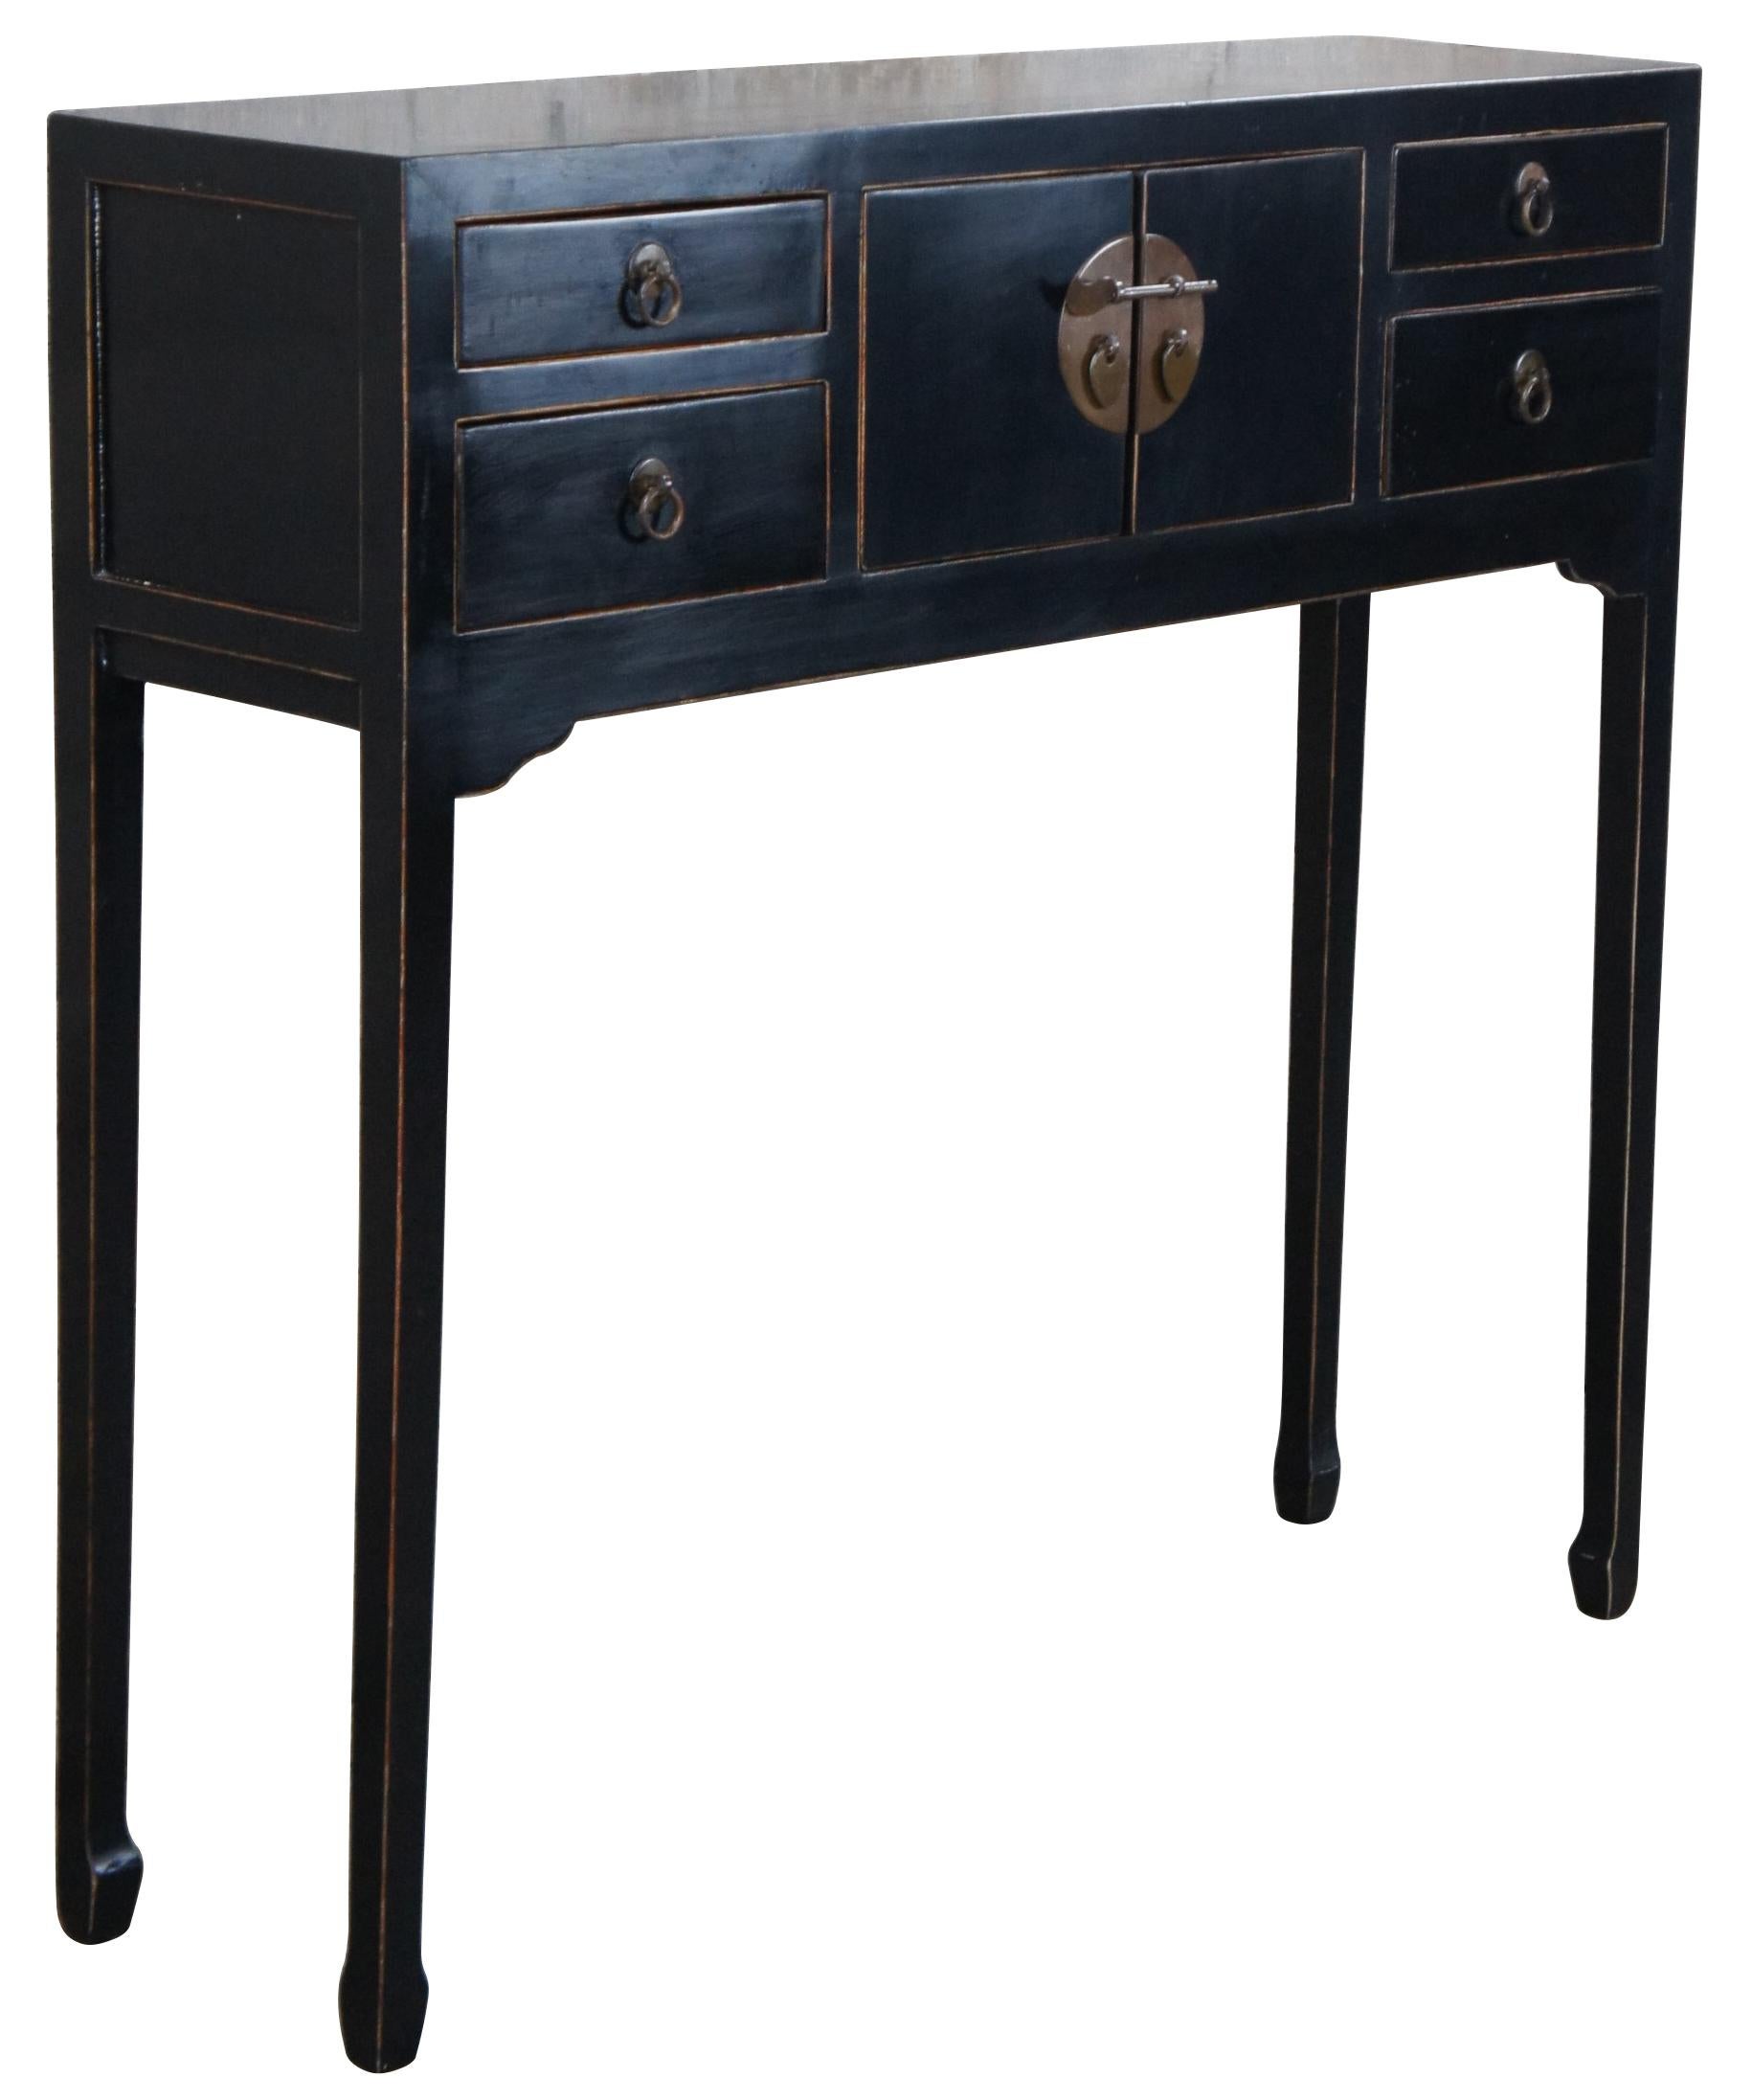 Ming Chinese Elmwood Black Lacquer Console Table Hall Cabinet Oriental Mandarin